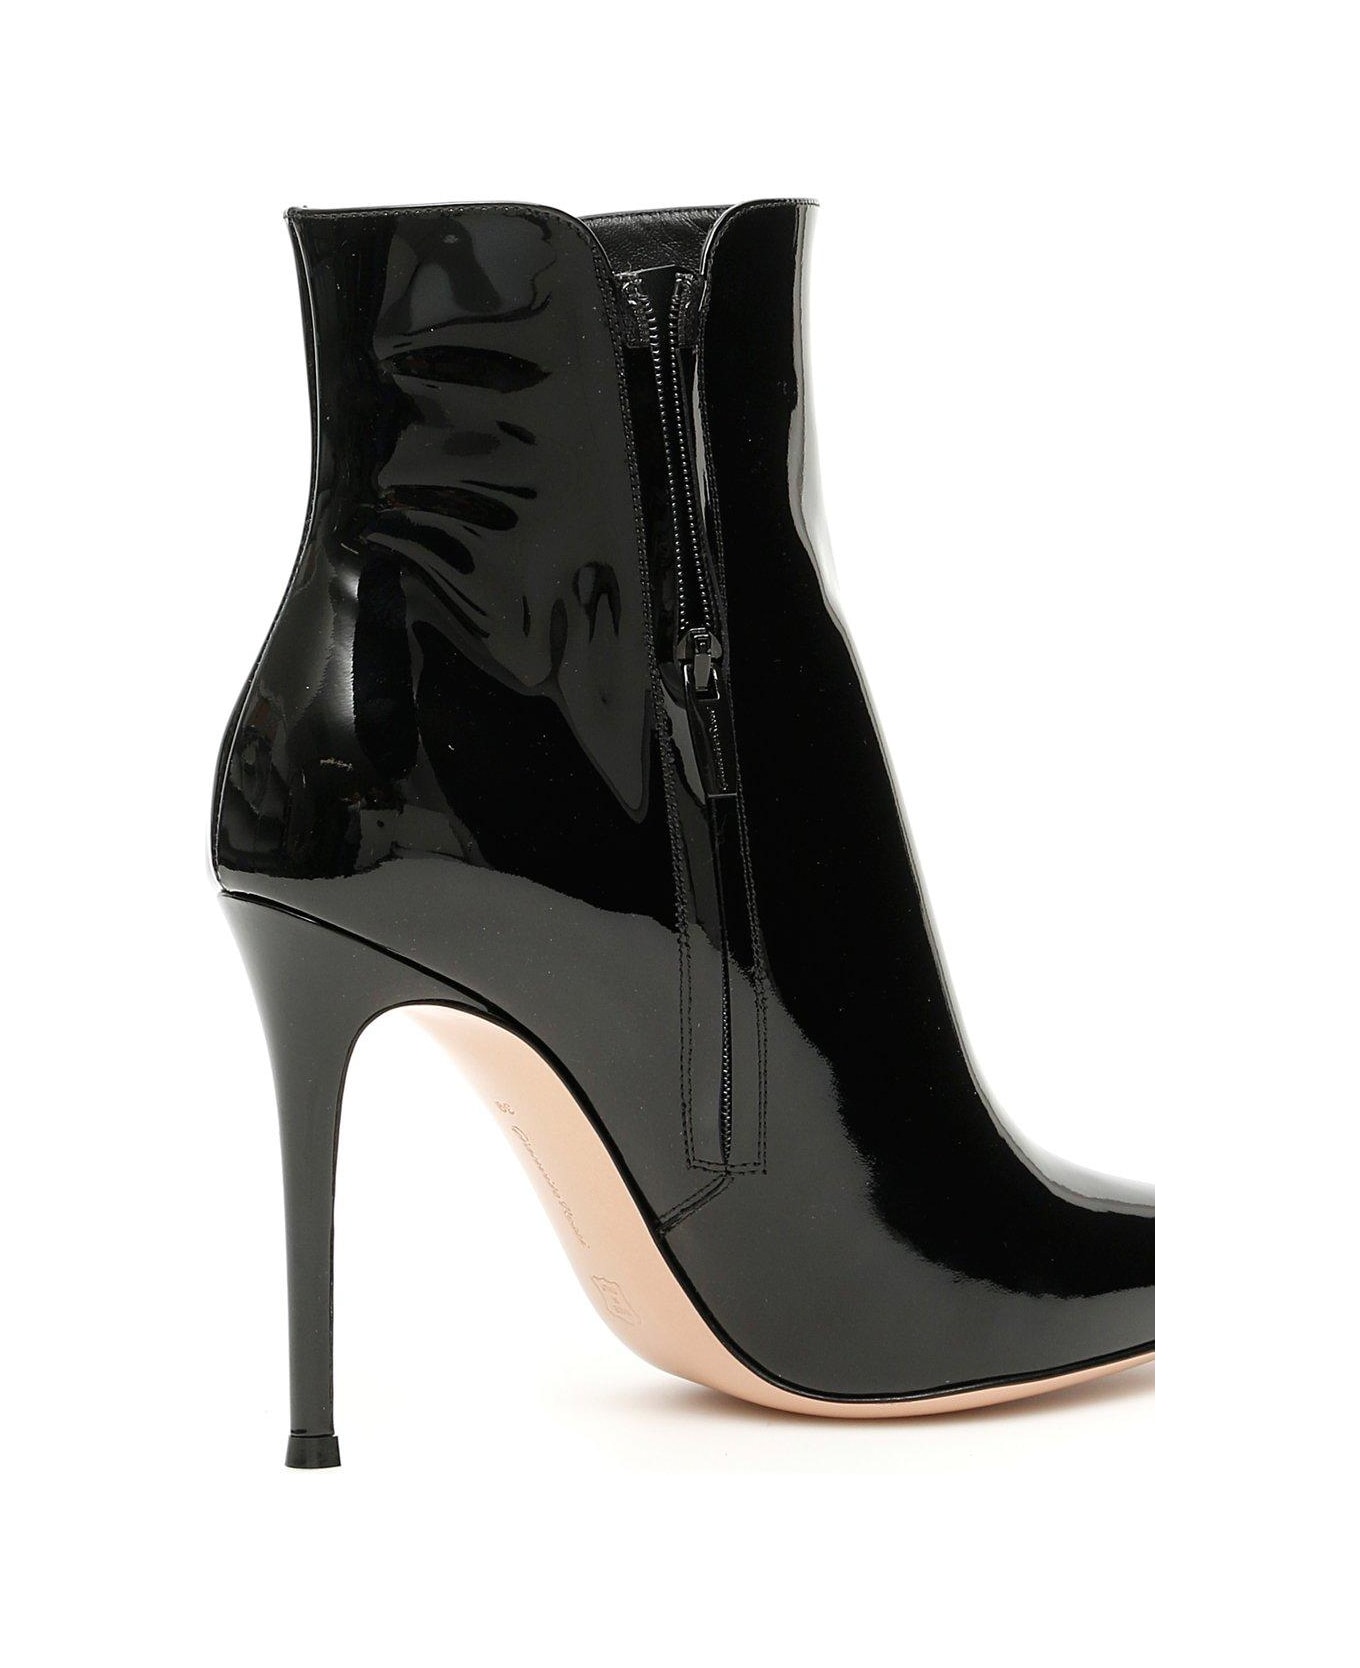 Gianvito Rossi Levy Zip-up Boots - Black